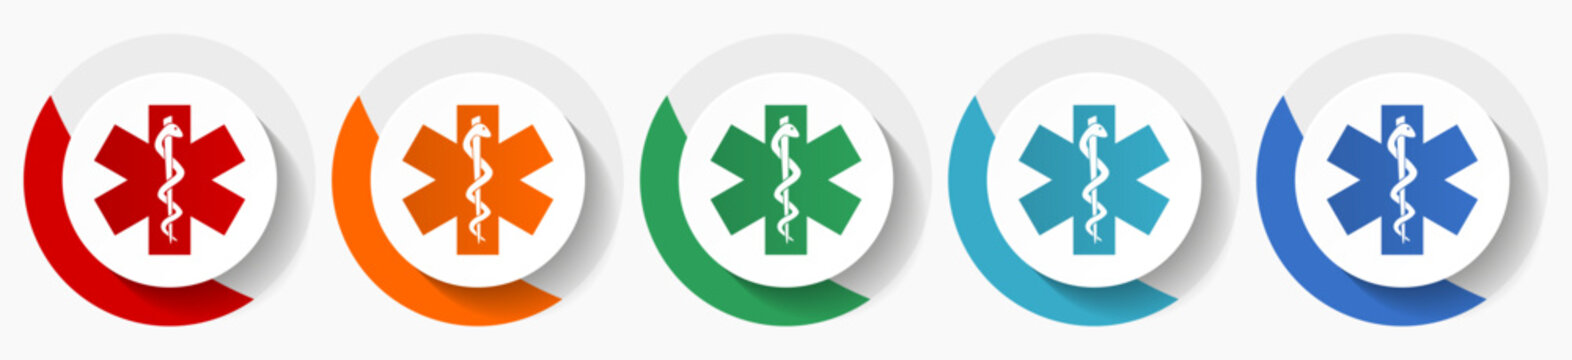 Hospital vector icon set, flat design colorful round emergency icons in 5 color options for webdesign and mobile applications